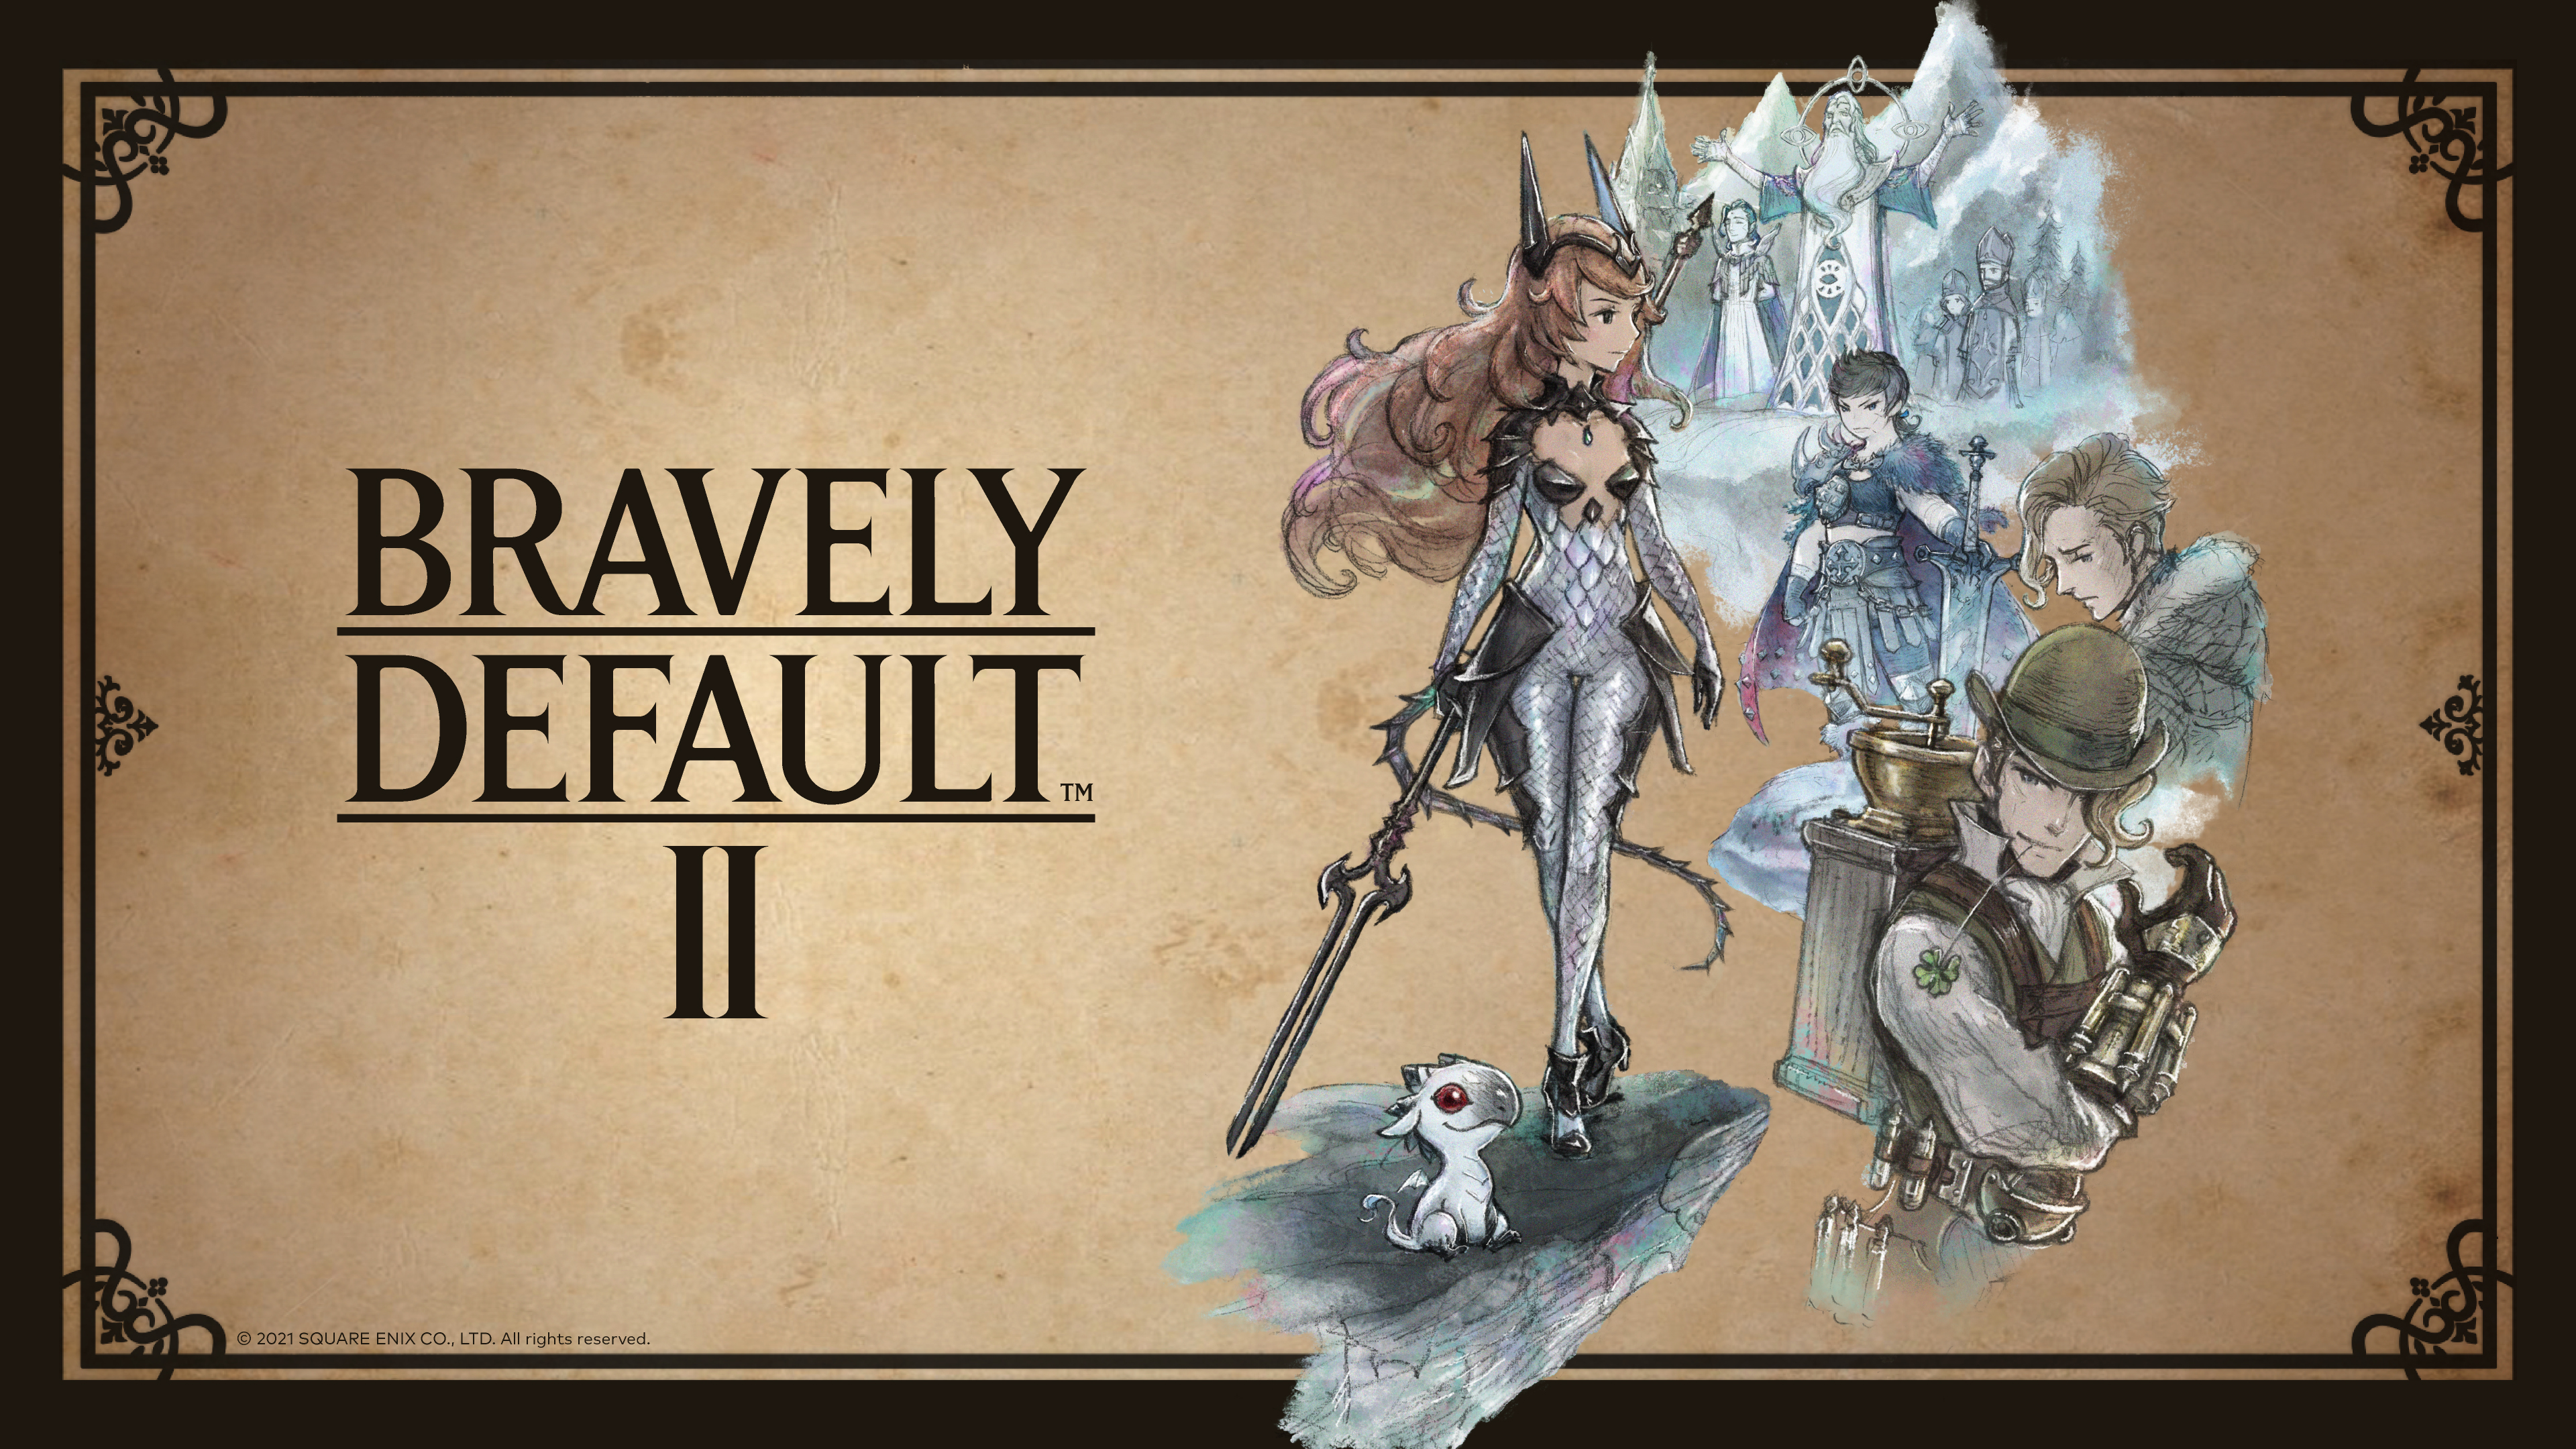 Bravely Default II Wallpaper, Square Enix, Free Download, Borrow, and Streaming, Internet Archive